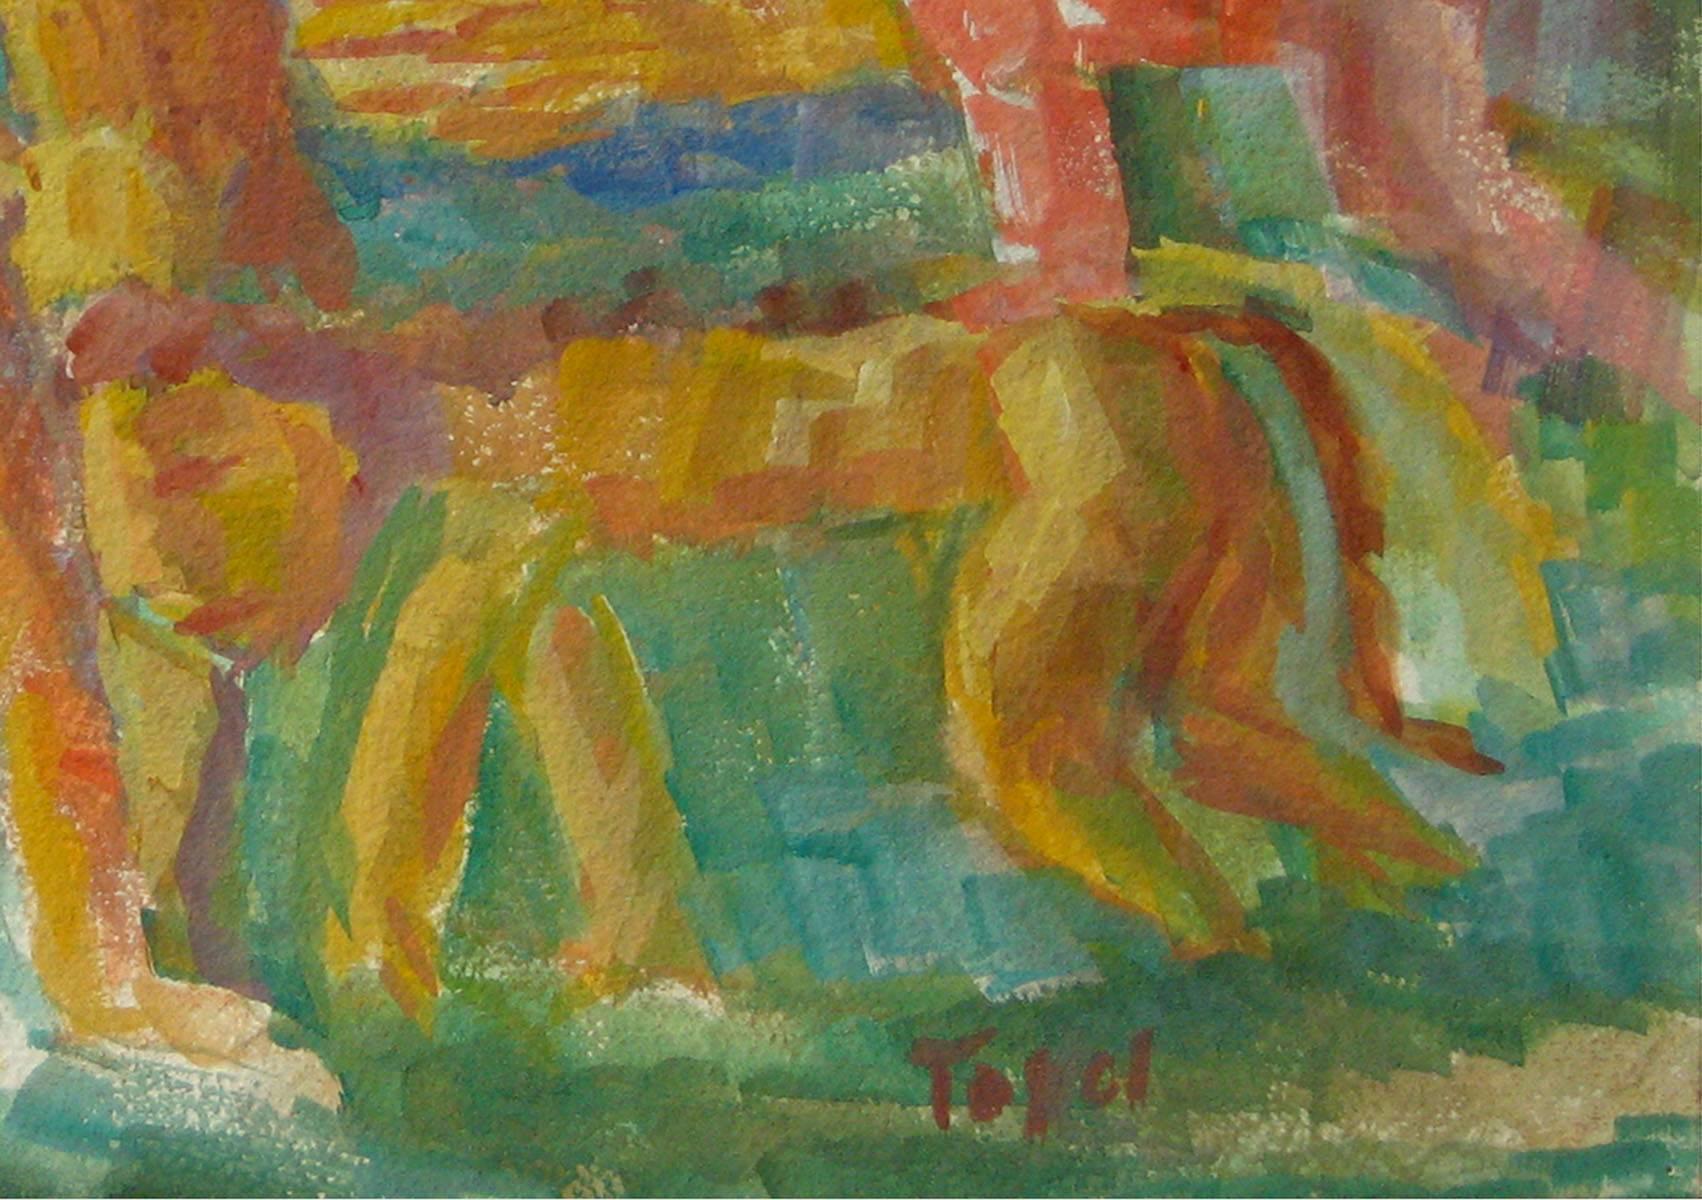 Expressionist Figures with a Lion, Watercolor on Paper, Mid 20th Century - Brown Figurative Art by Jennings Tofel